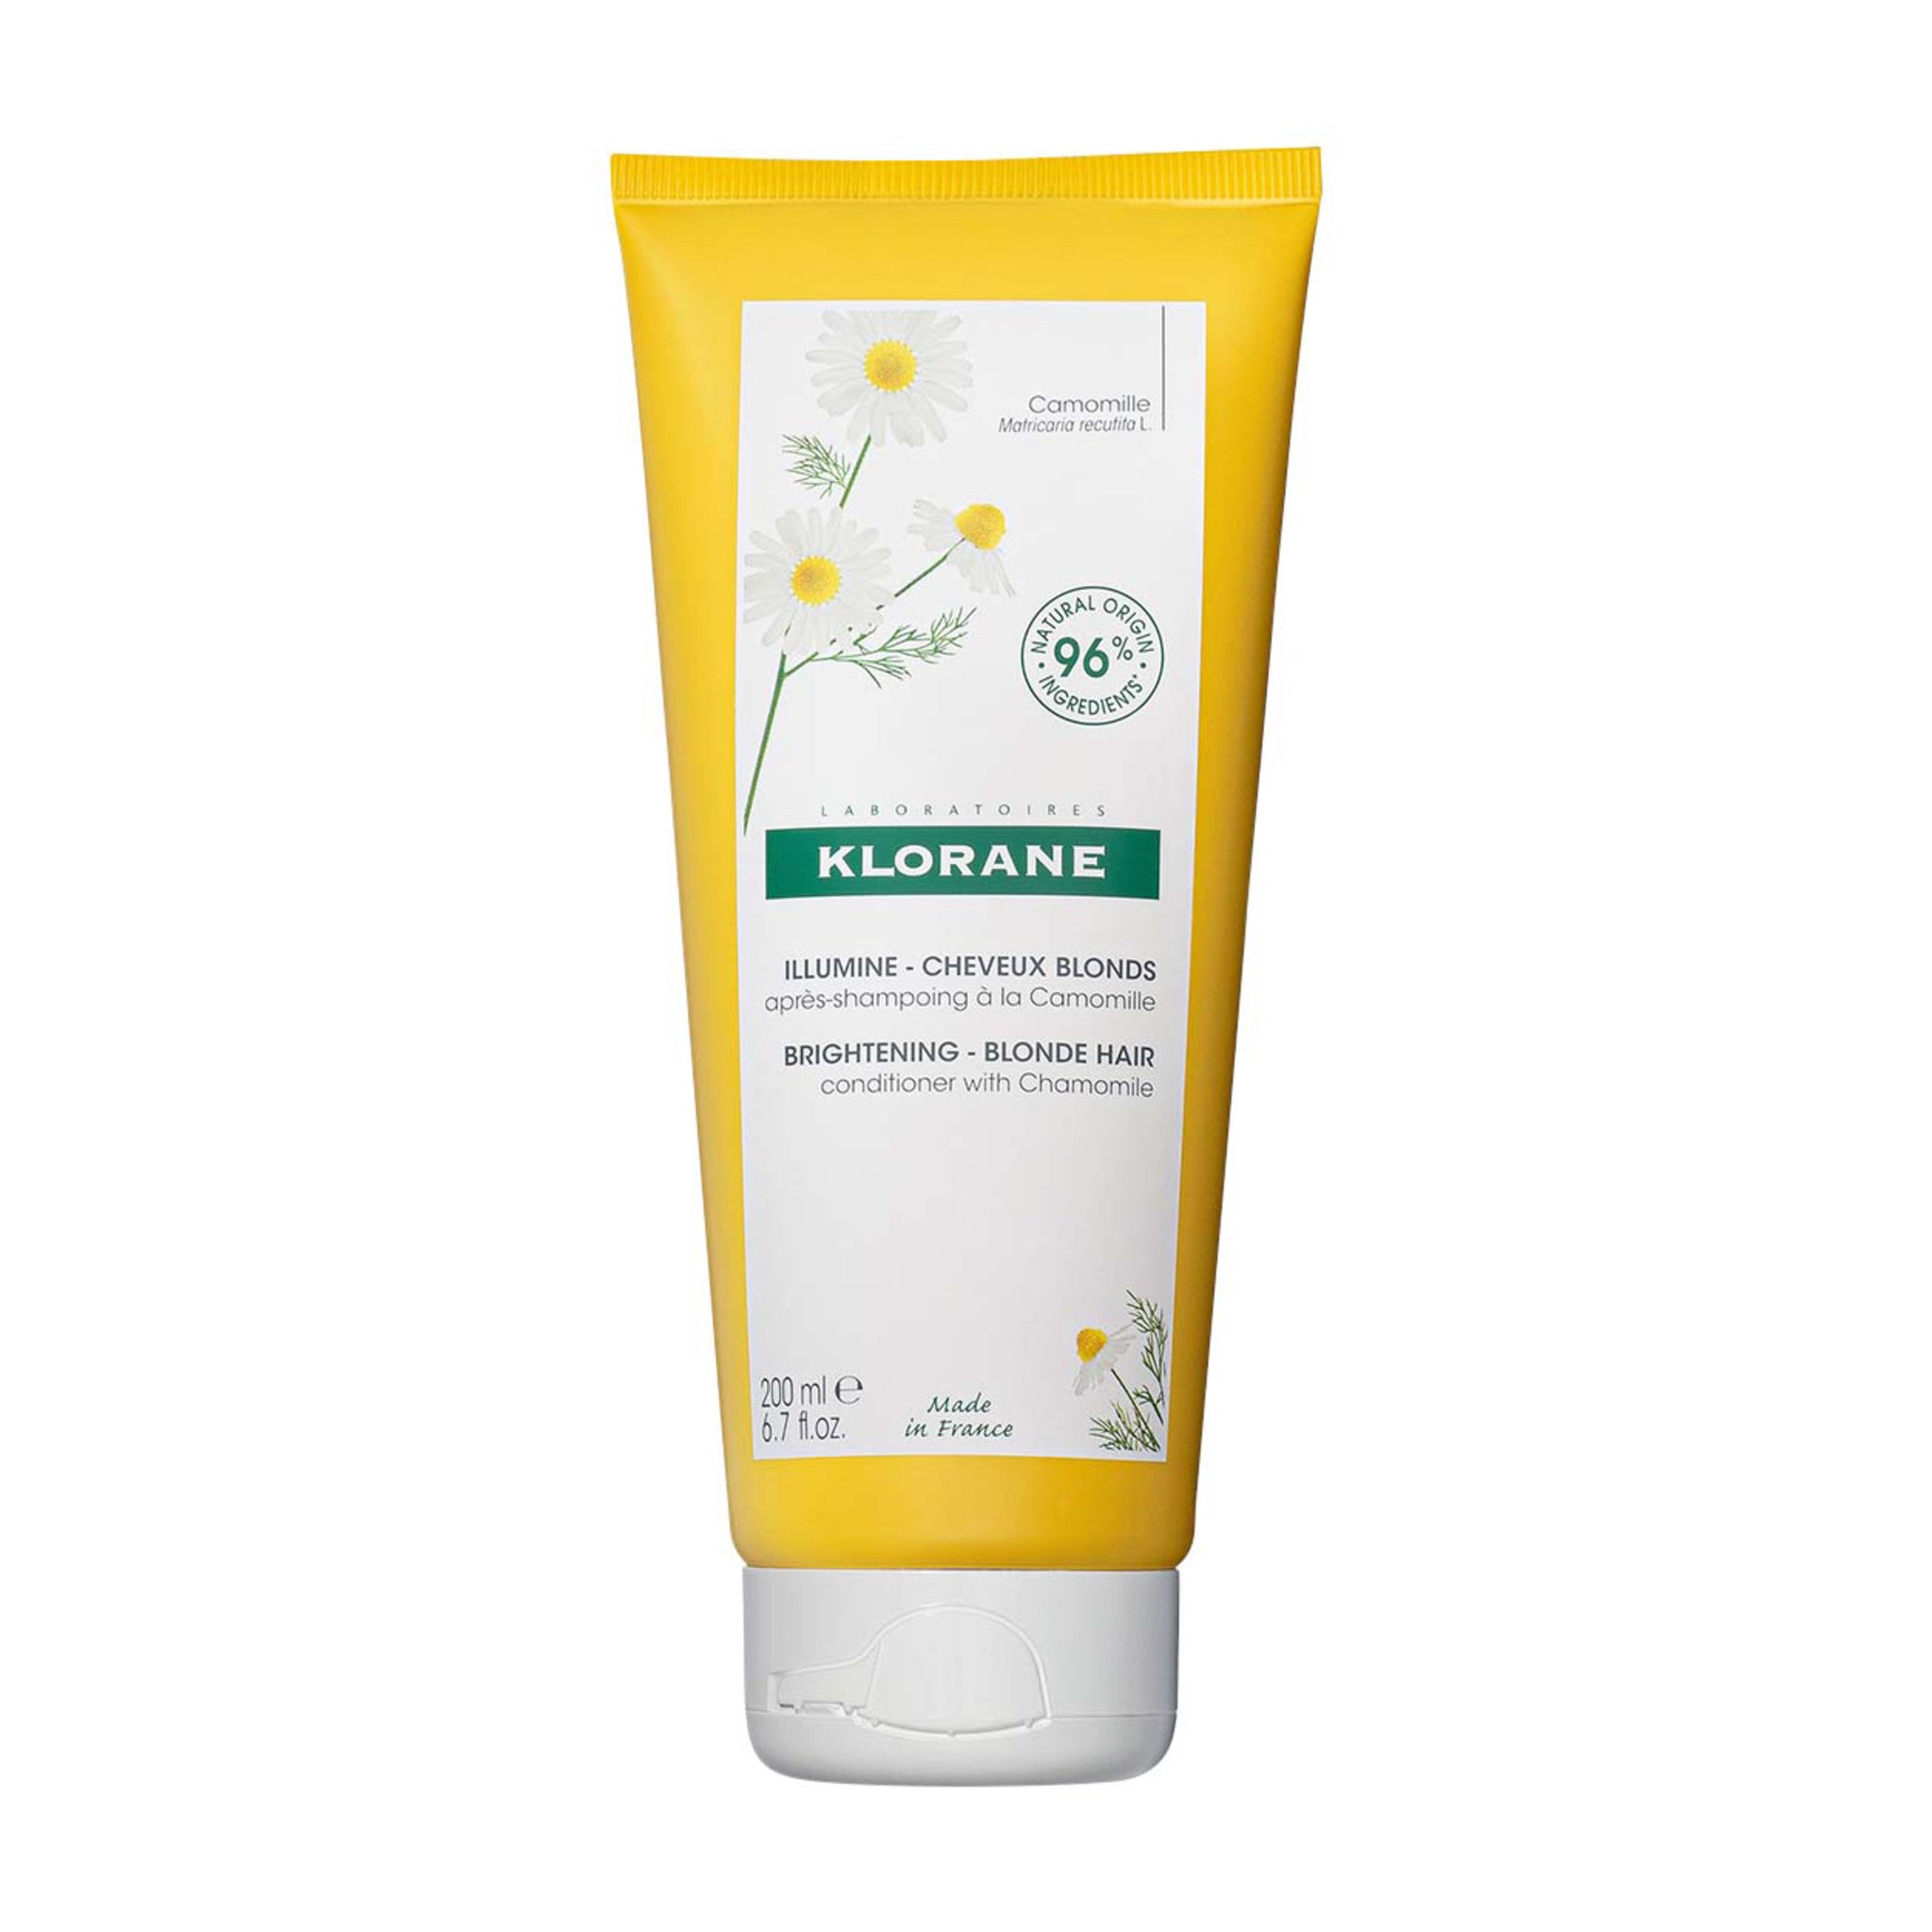 Klorane Brightening Conditioner with Chamomile main image. This product is for blonde hair